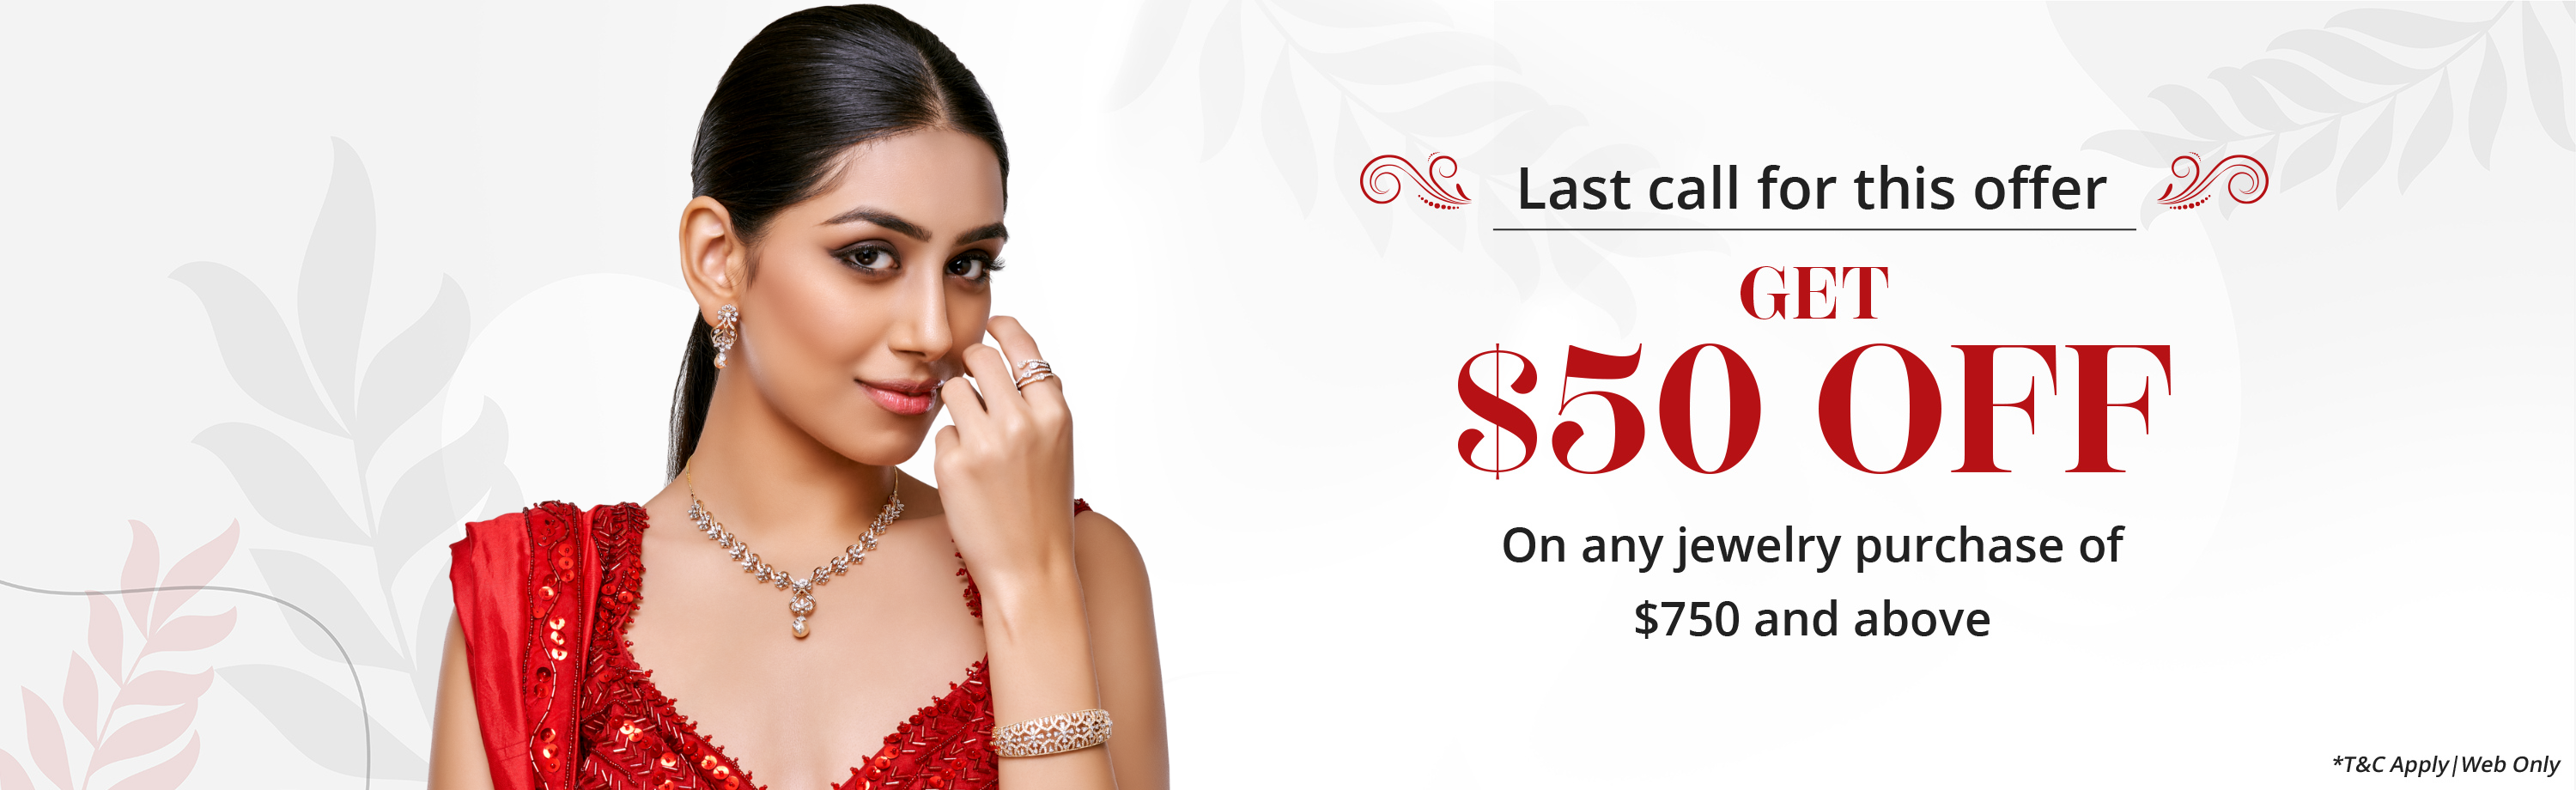 Last_Call_$50_Off_Any_Jewlery_Purchase_$750_Above_Desktop